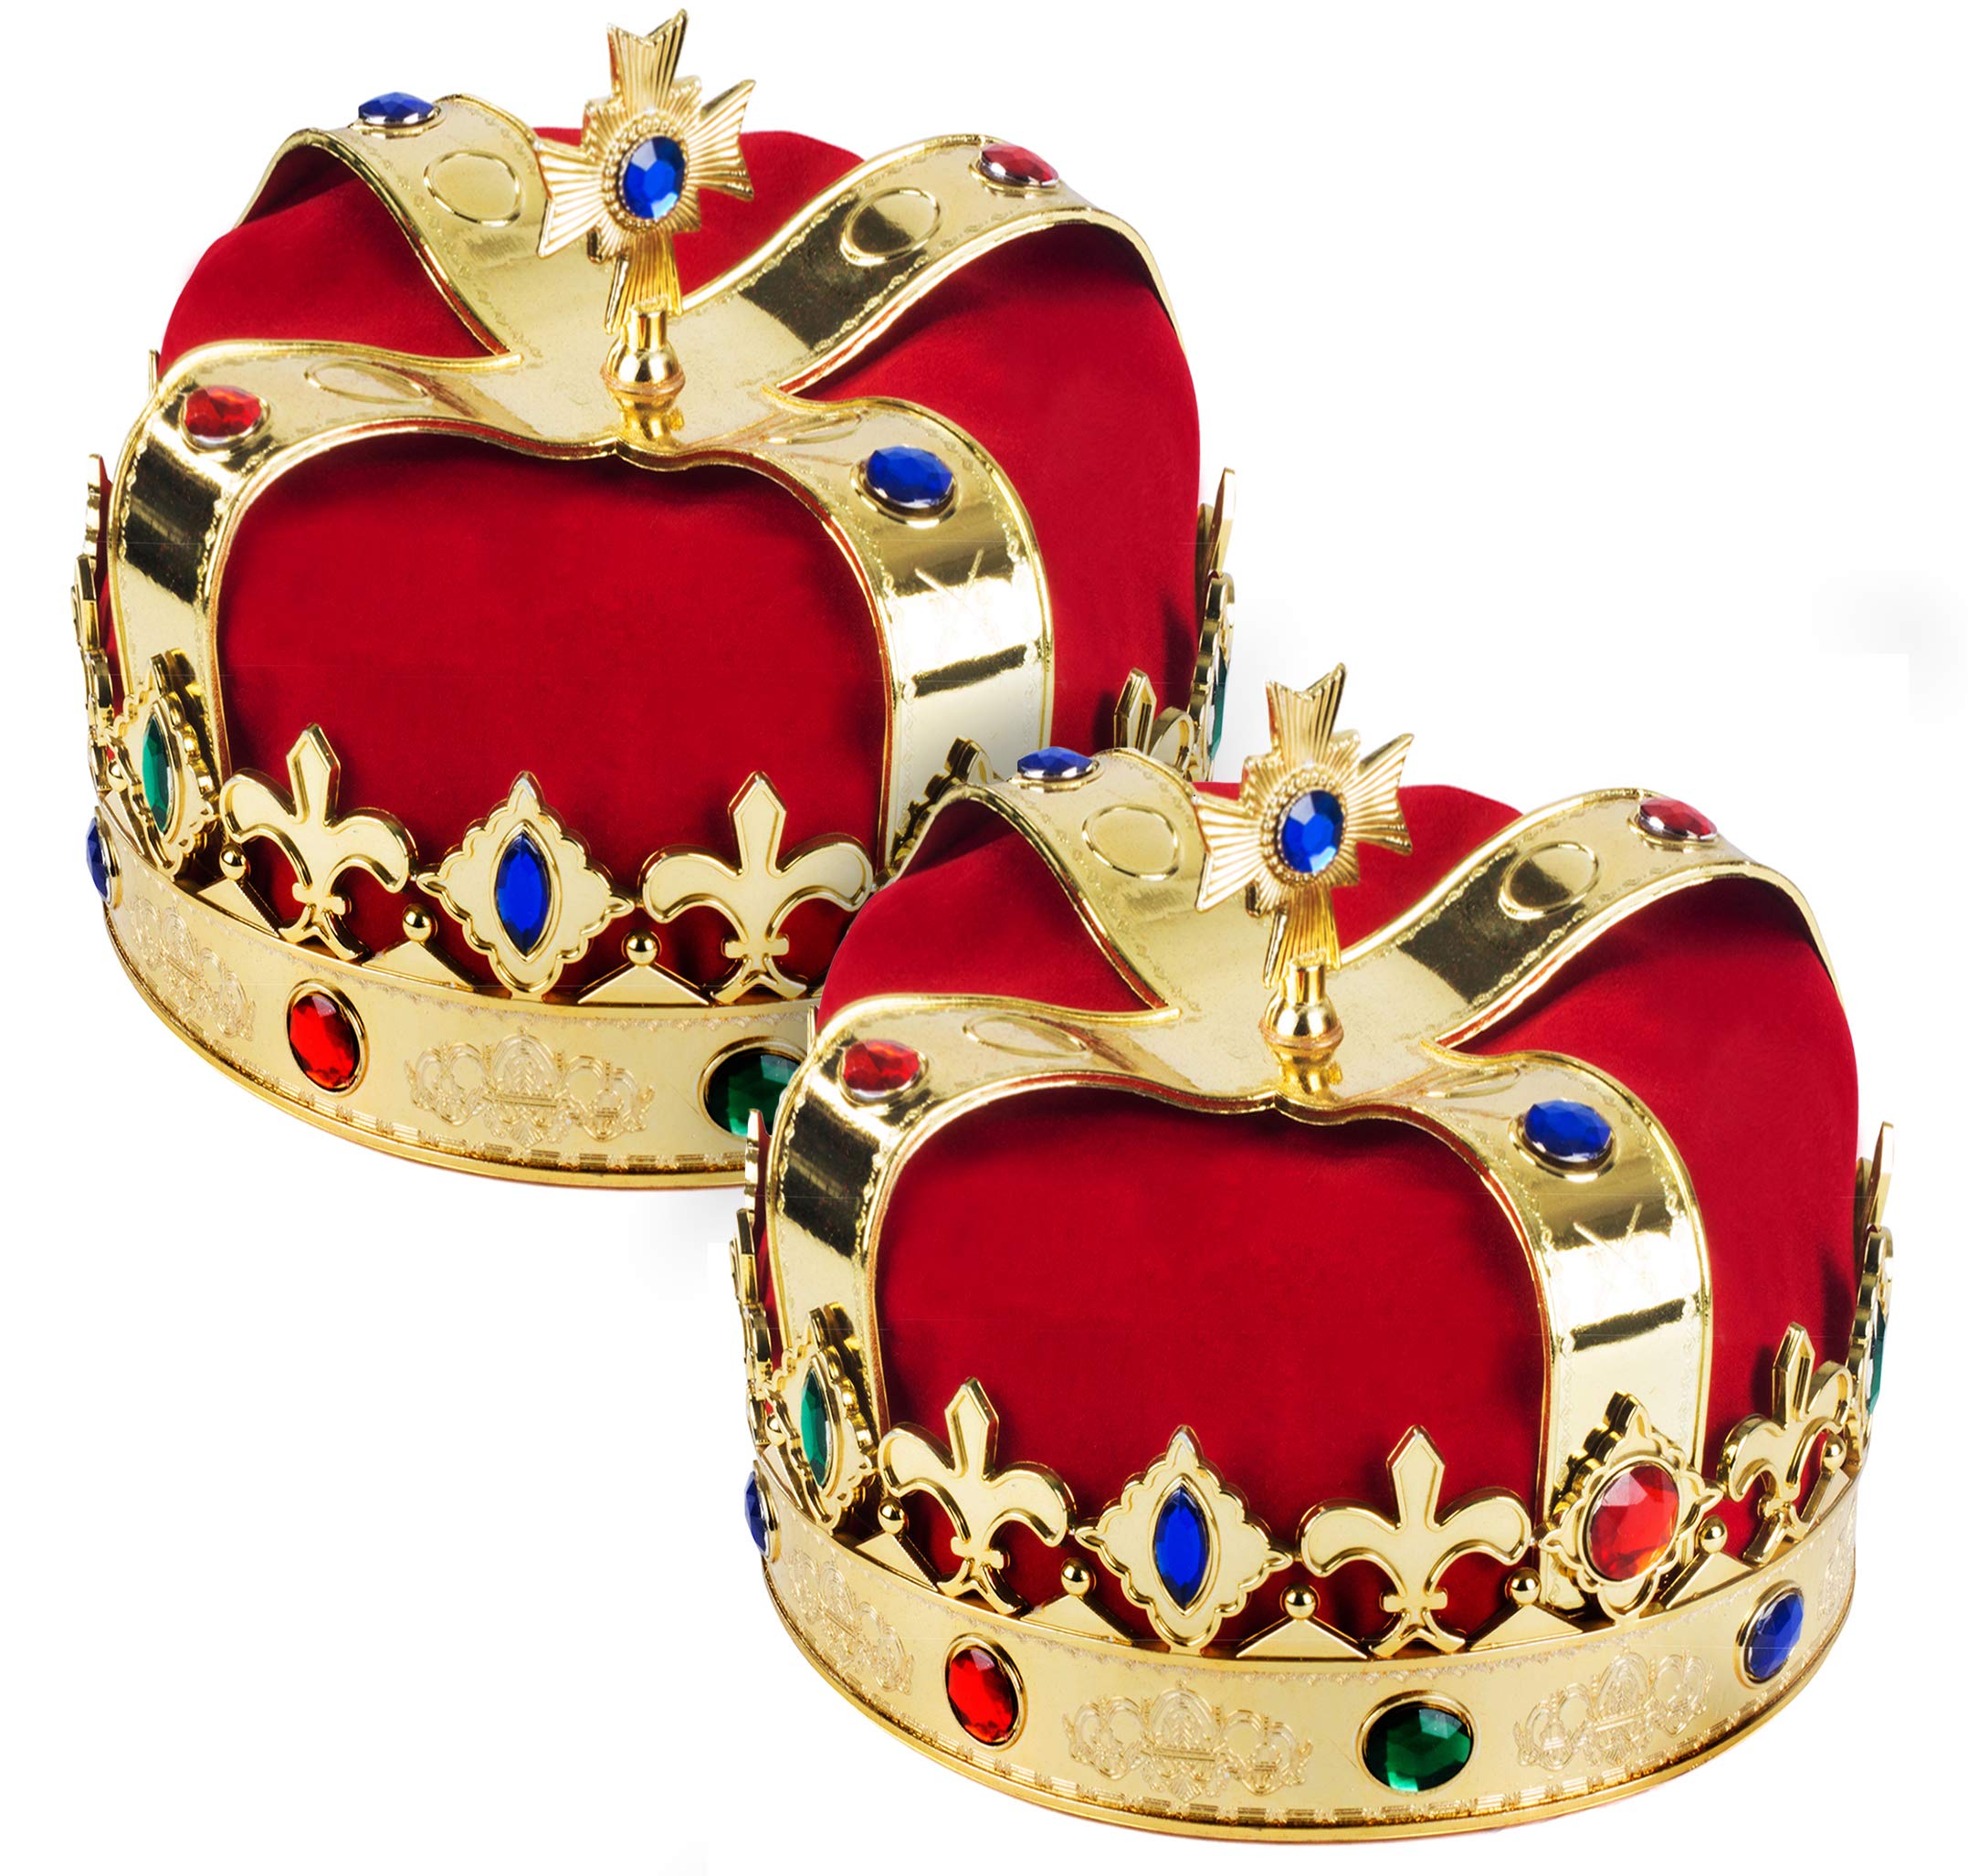 Funny Party Hats - Royal king Crown - Royal Jeweled King's Crown - King Costume Accessories - Regal King Crown